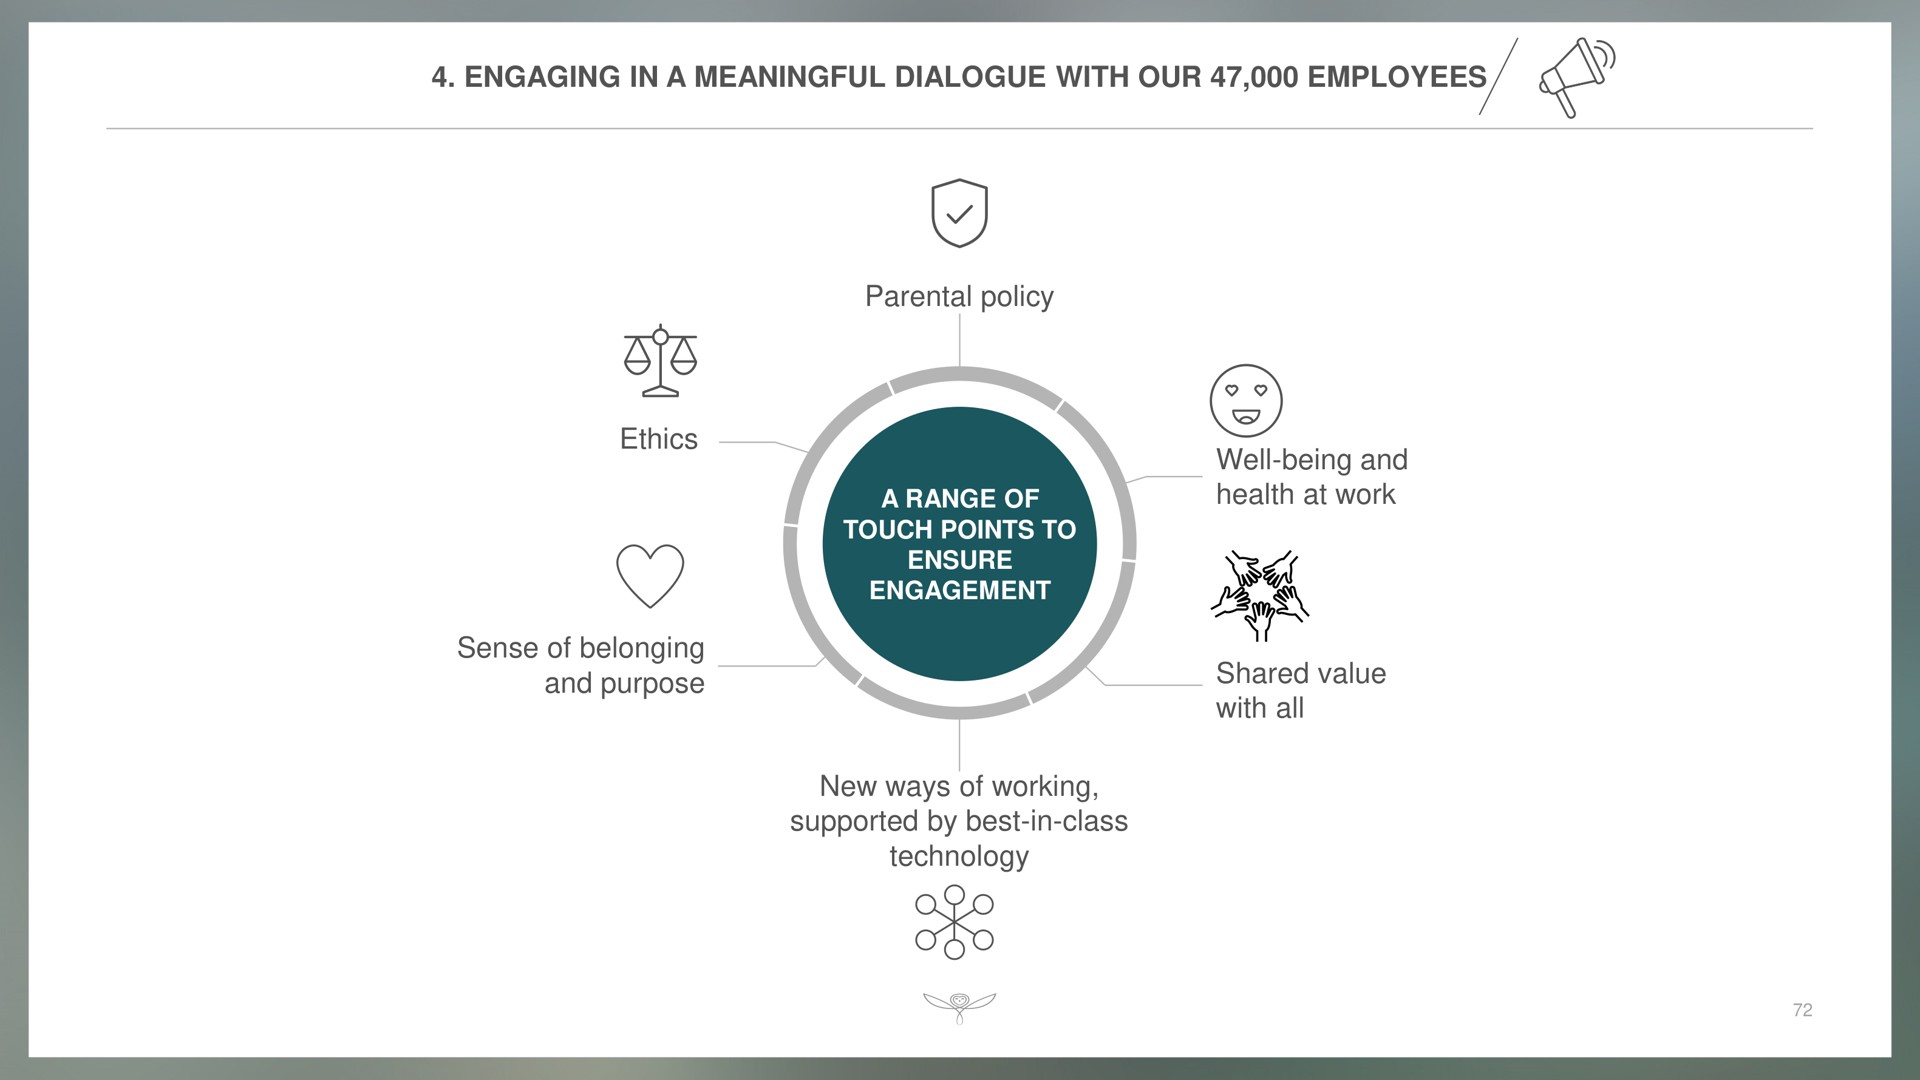 engaging in a meaningful dialogue with our employees ethics sense of belonging and purpose parental policy a range of touch points to ensure engagement new ways of working supported by best in class technology well being and health at work shared value with all | Kering